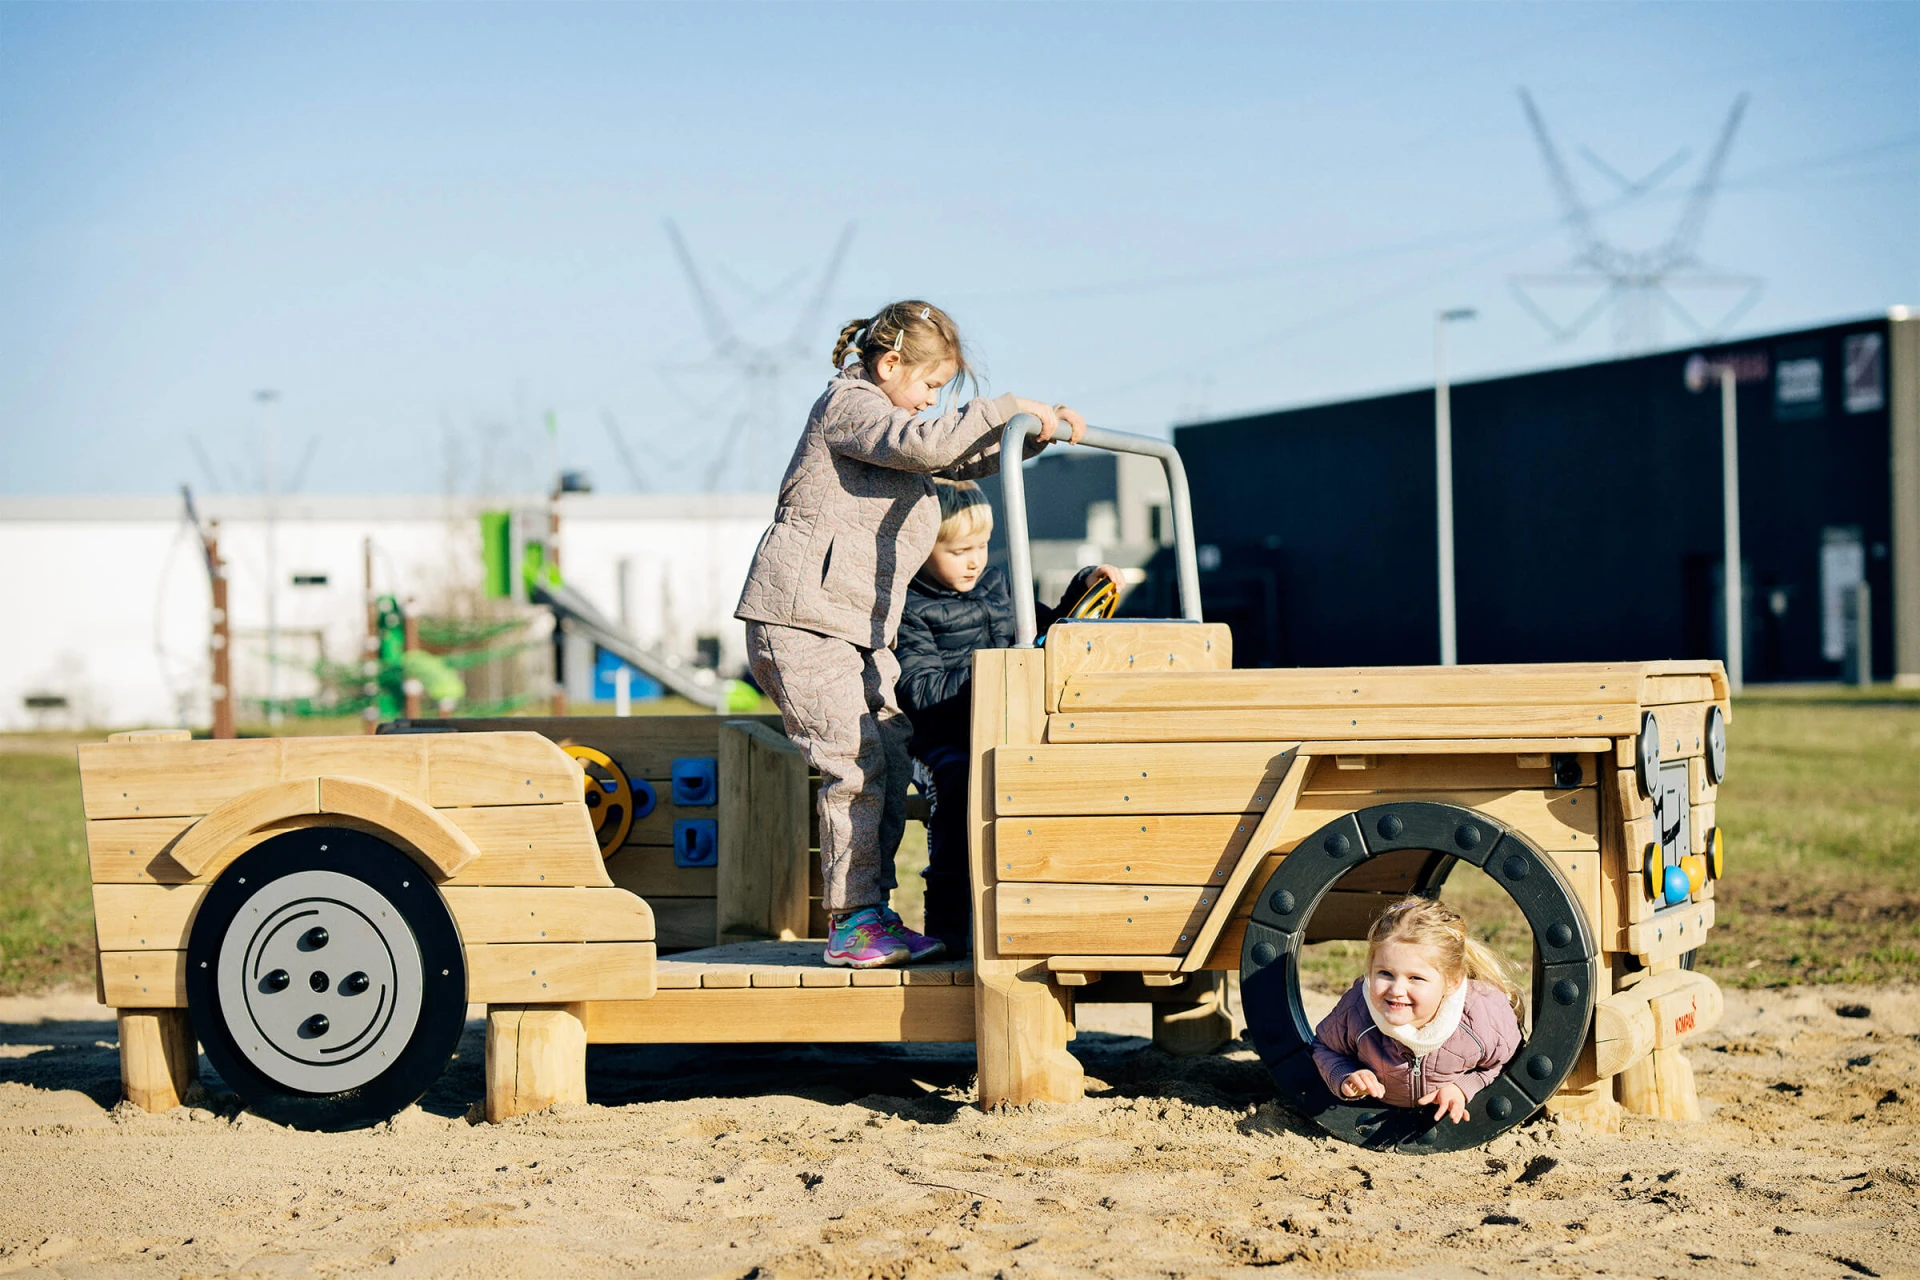 Kids playing on a themed wooden car in a playground